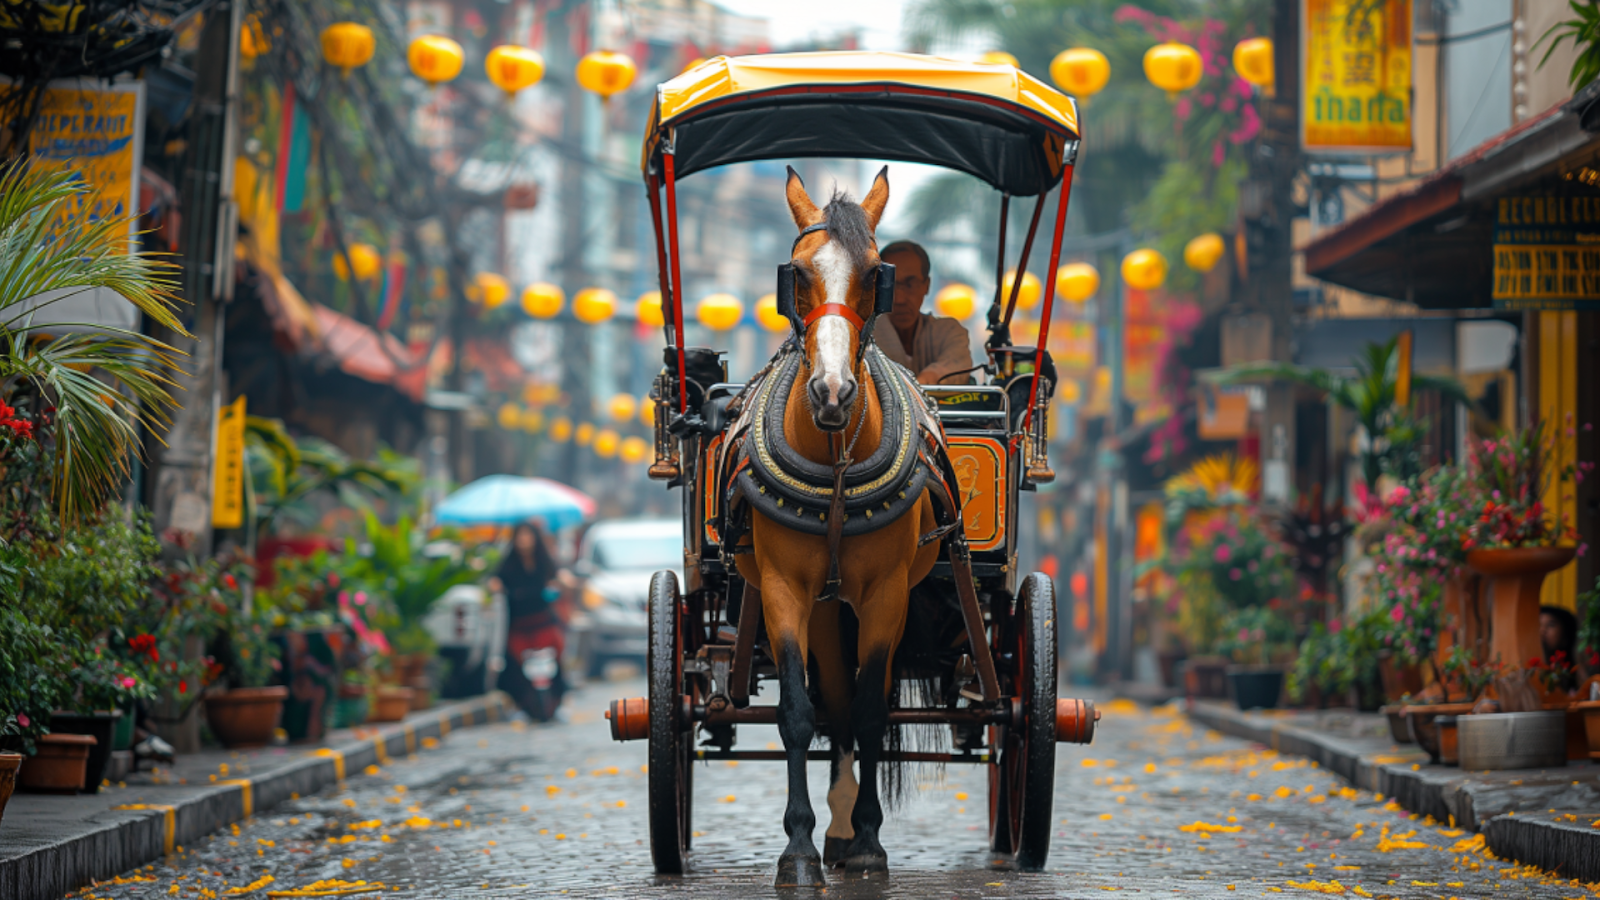 A traditional 'kalesa' ride through the cobbled streets of Manila.